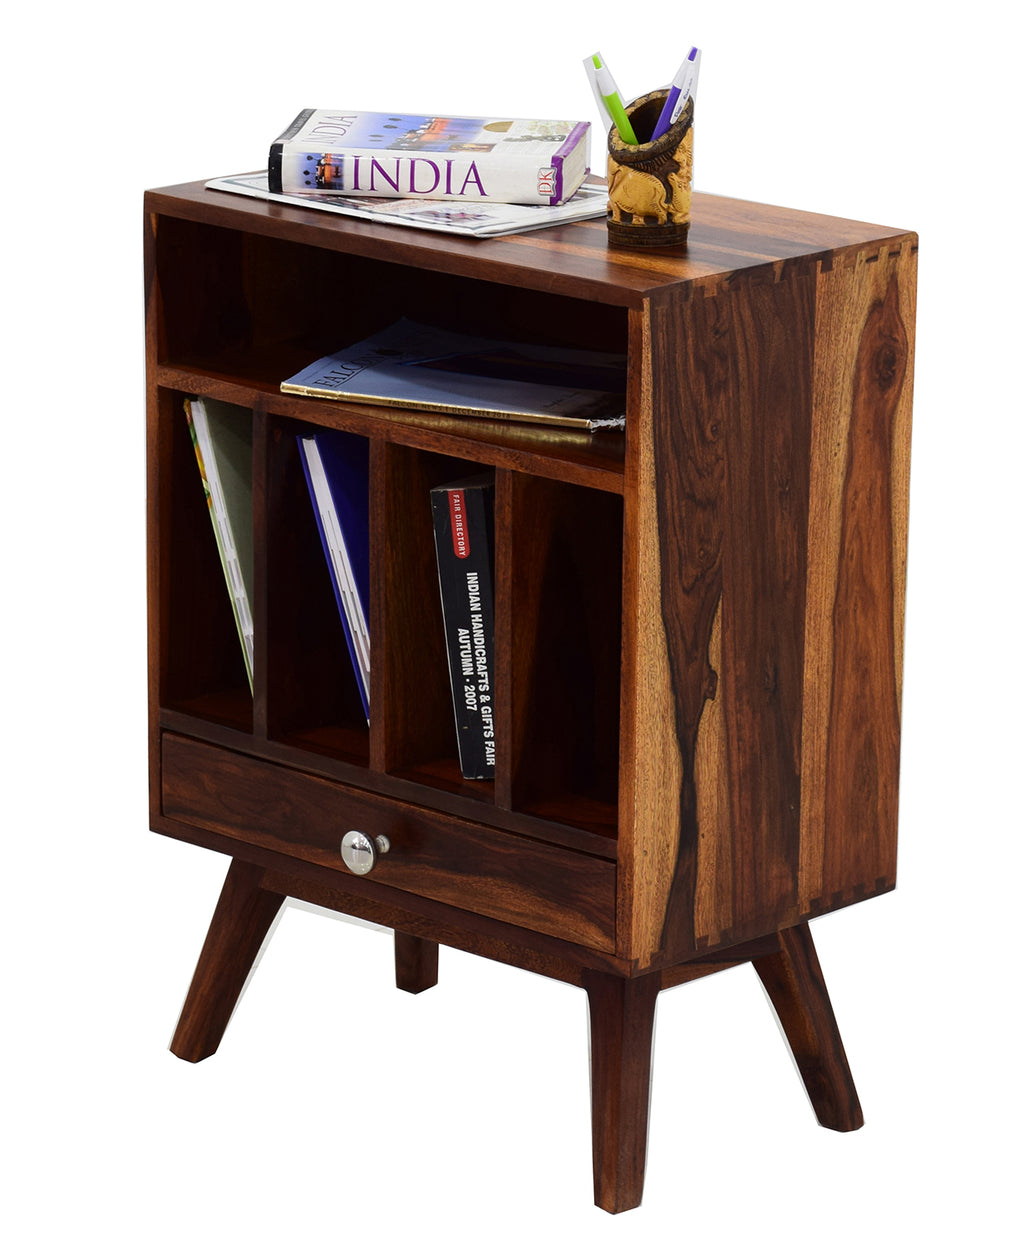 TimberTaste BONY Solid Wood End Table in Natural Teek And Dark Walnut Finish, corner table, end table, accent table, solid wood table, telephone table, fish tank stand, wooden table, sofa table, bedside table,Teek Finish.